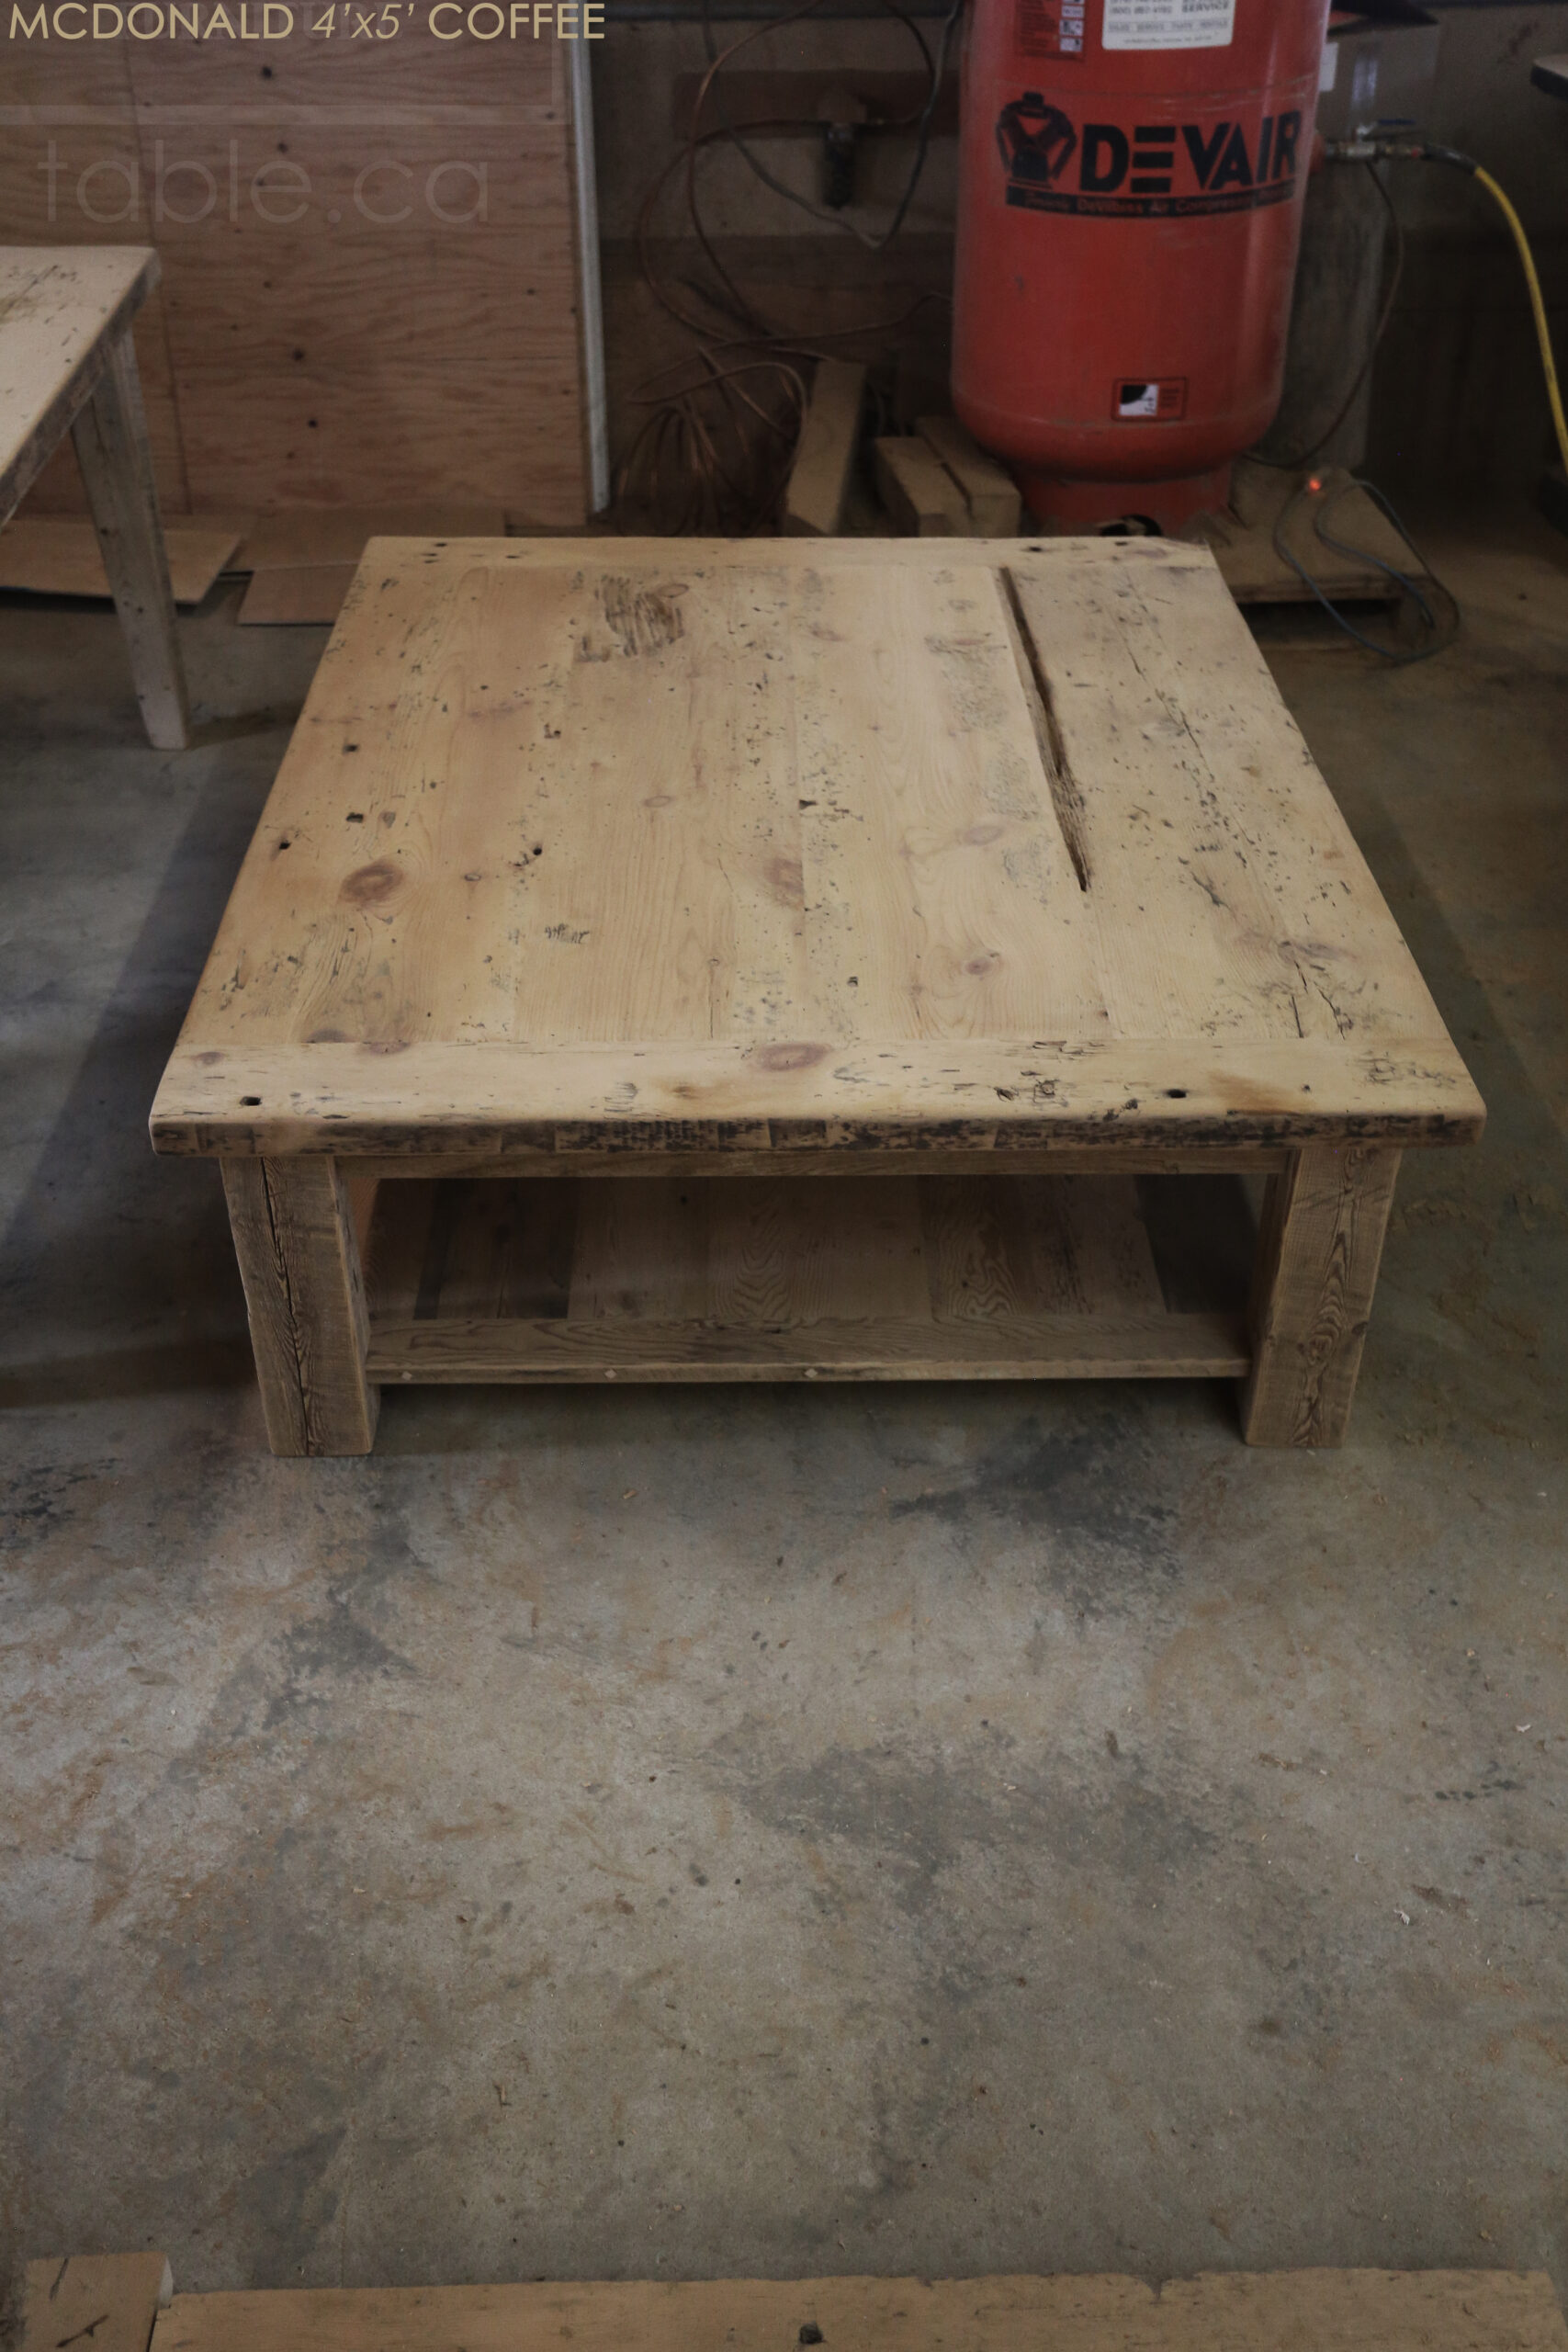 4’ x 5’ Reclaimed Ontario Barnwood Coffee Table we made for a Kincardine, Ontario home – 18” height - – Old Growth Hemlock Threshing Floor Construction - Original edges & distressing maintained – Bread Edge Board Ends – Premium epoxy + matte polyurethane finish - www.table.ca